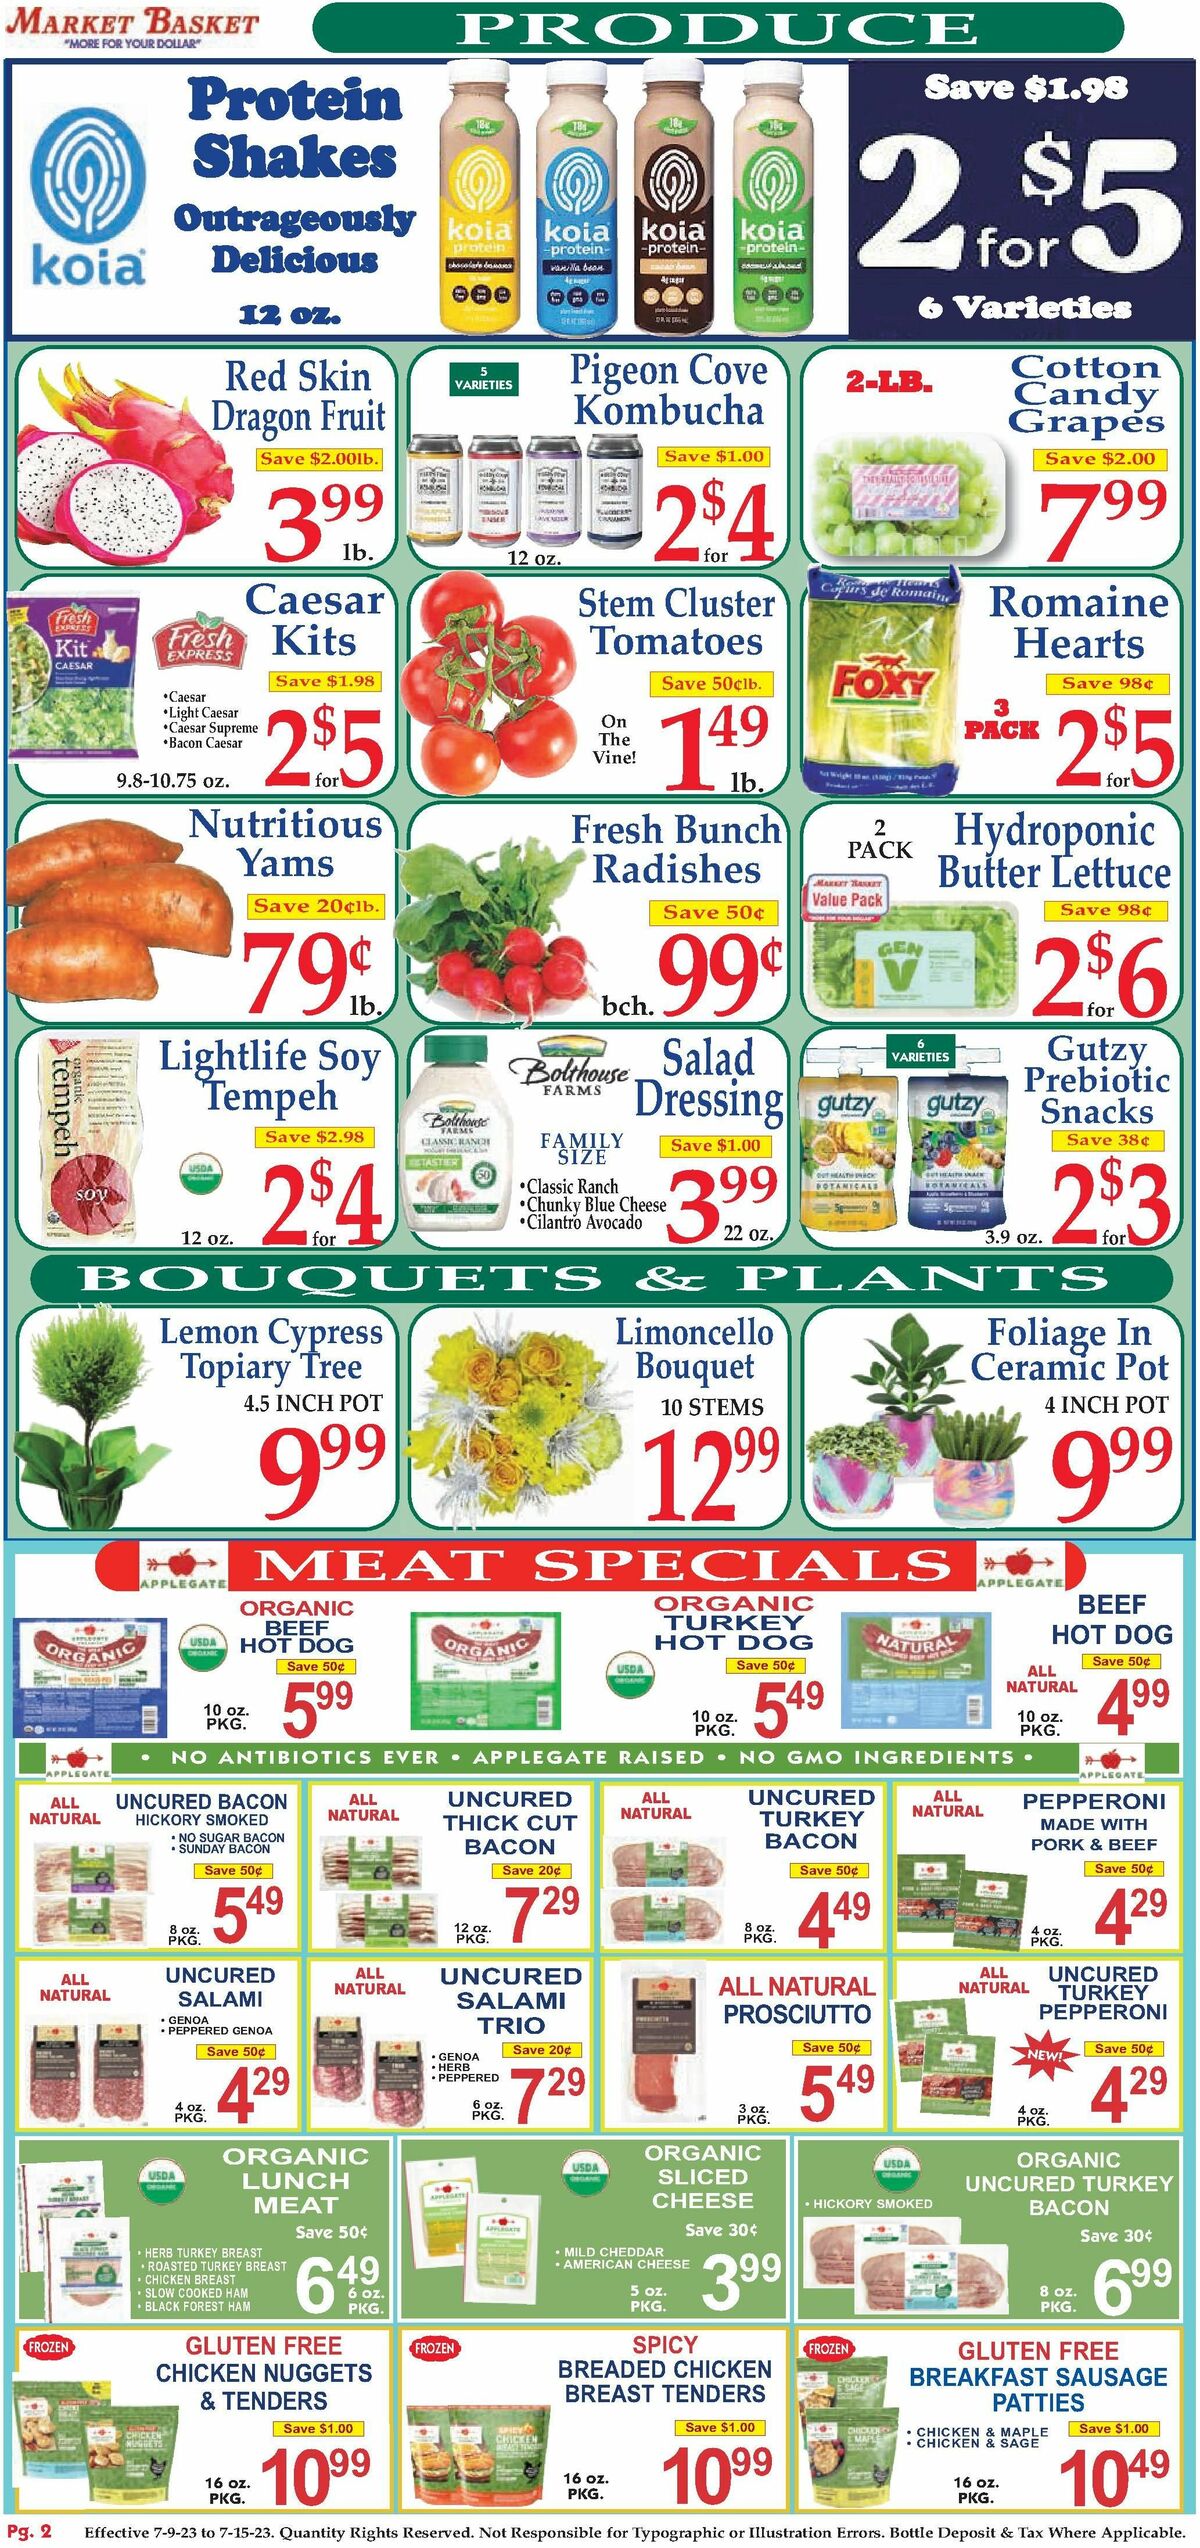 Market Basket Weekly Ad from July 9